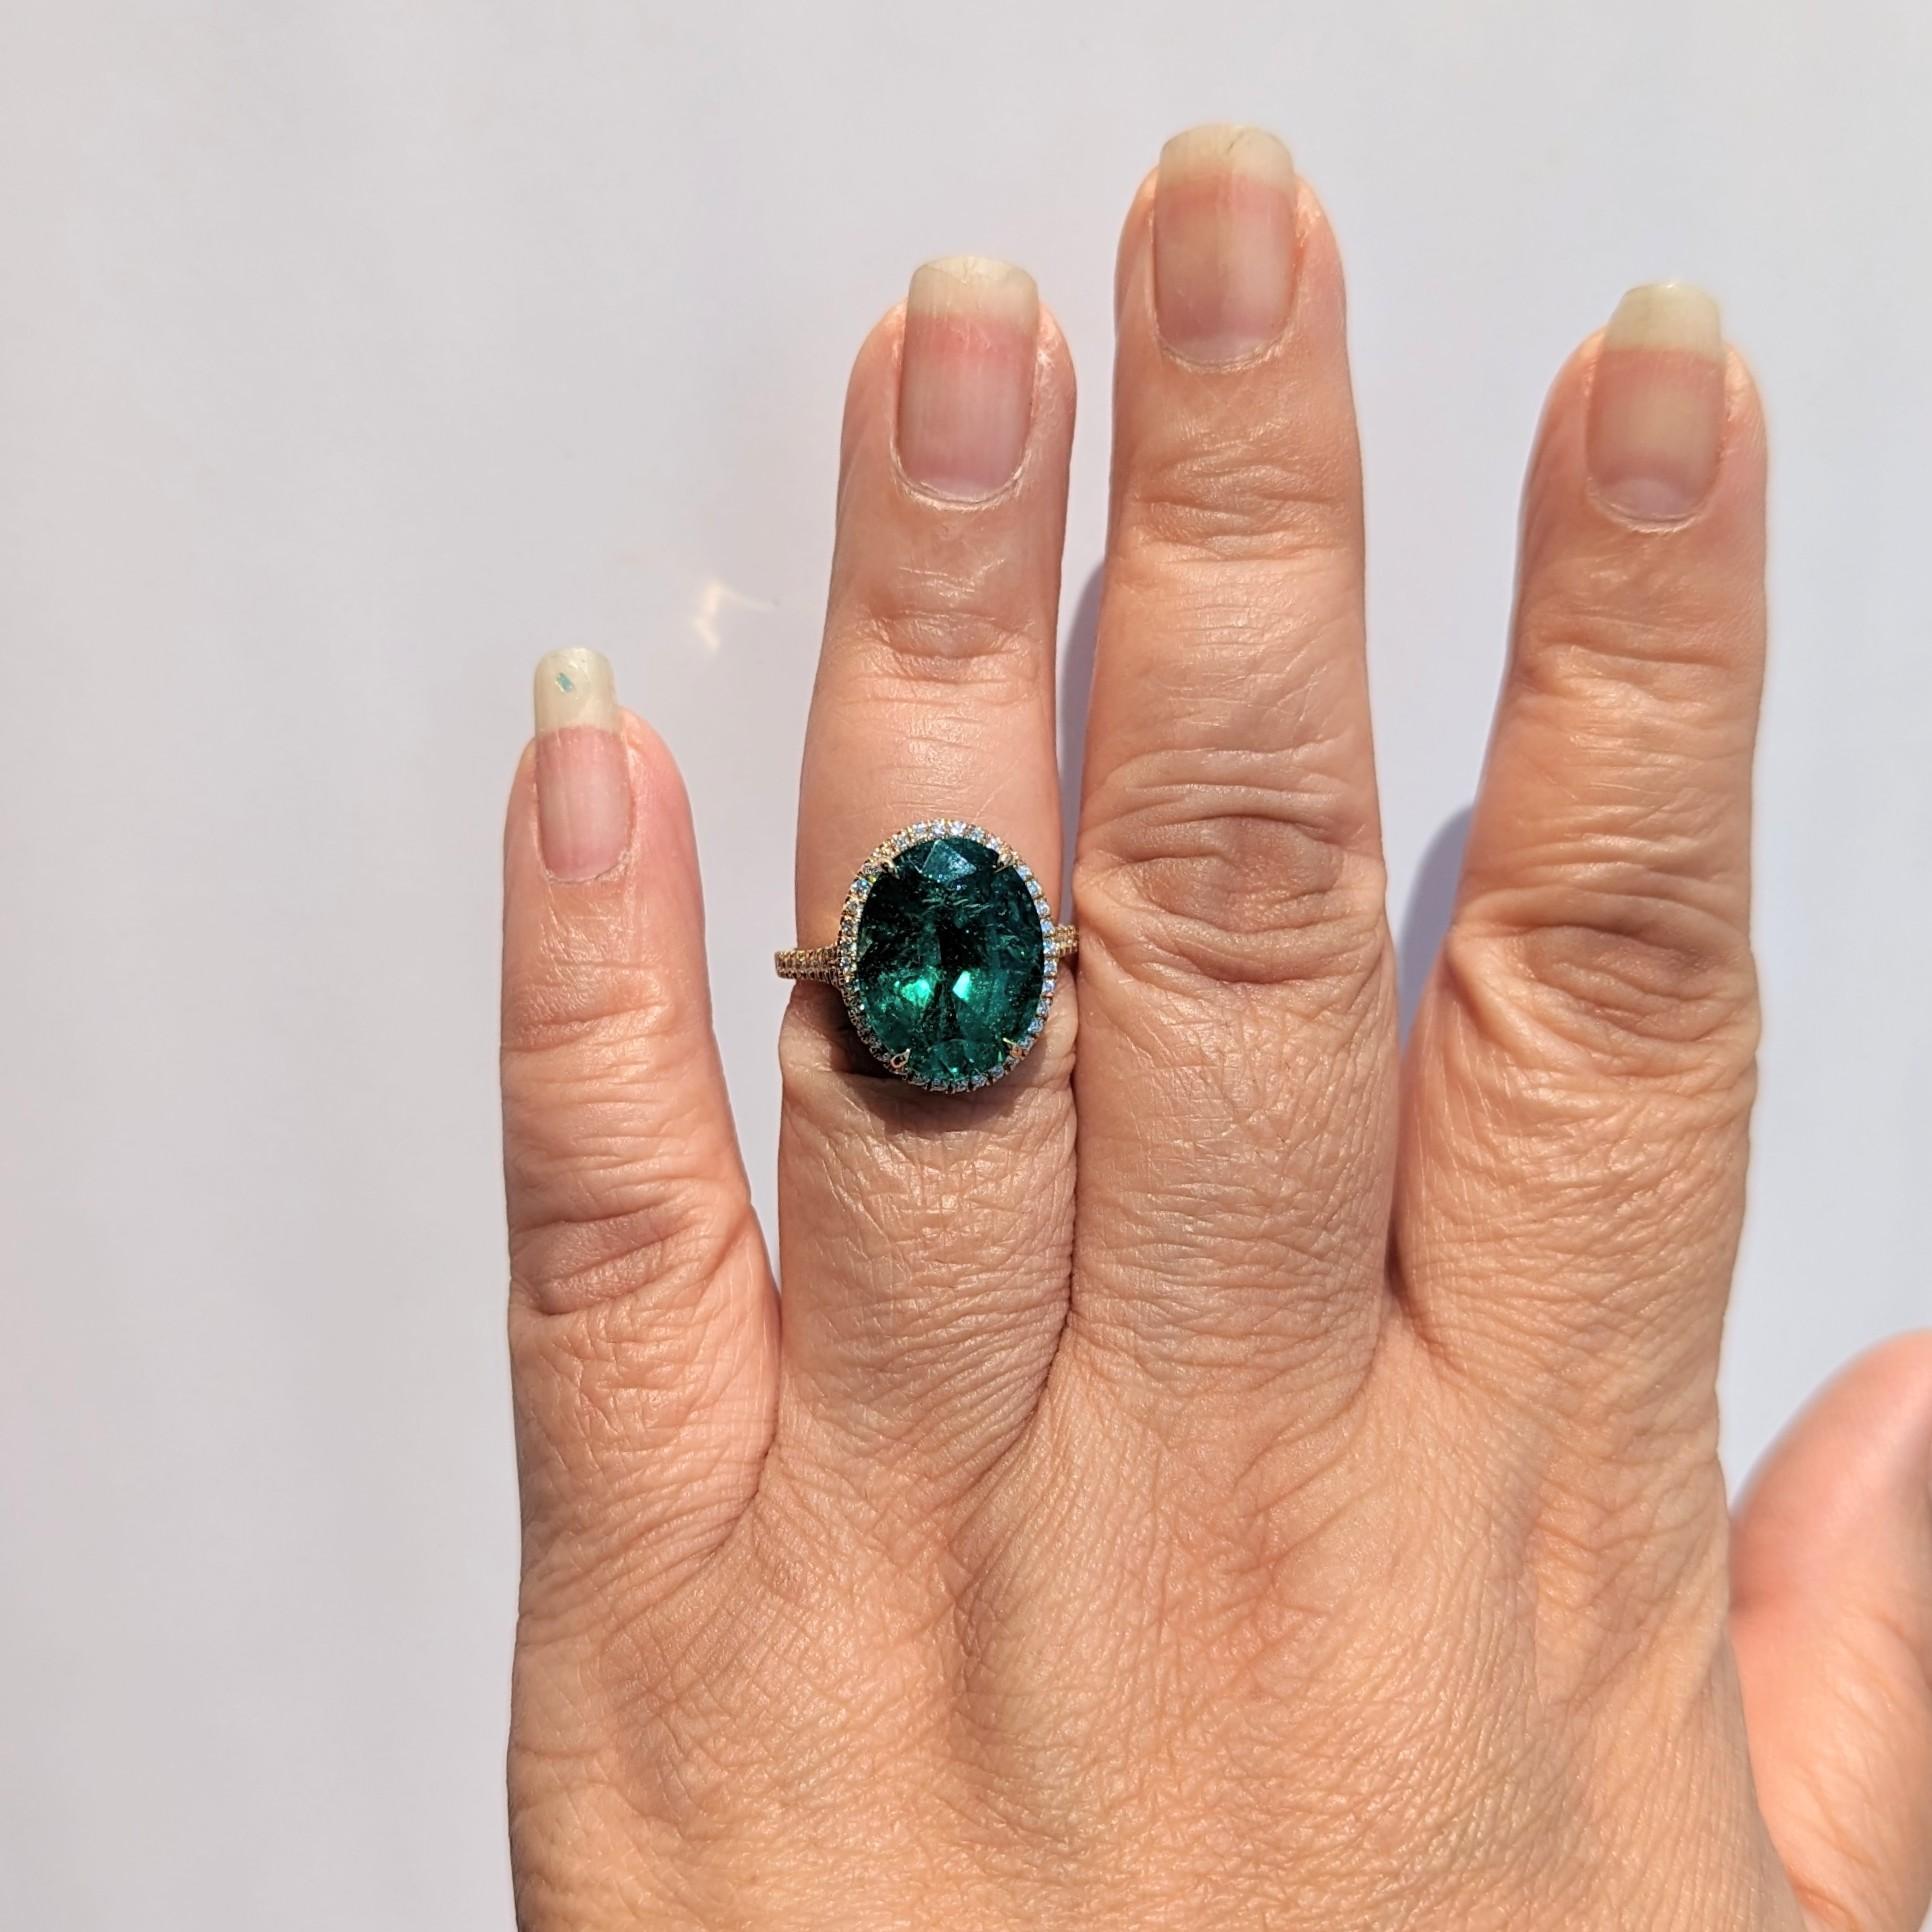 Beautiful 8.42 ct. emerald oval with 0.51 ct. good quality white diamond rounds.  Handmade in 18k yellow gold.  Ring size 6.5.